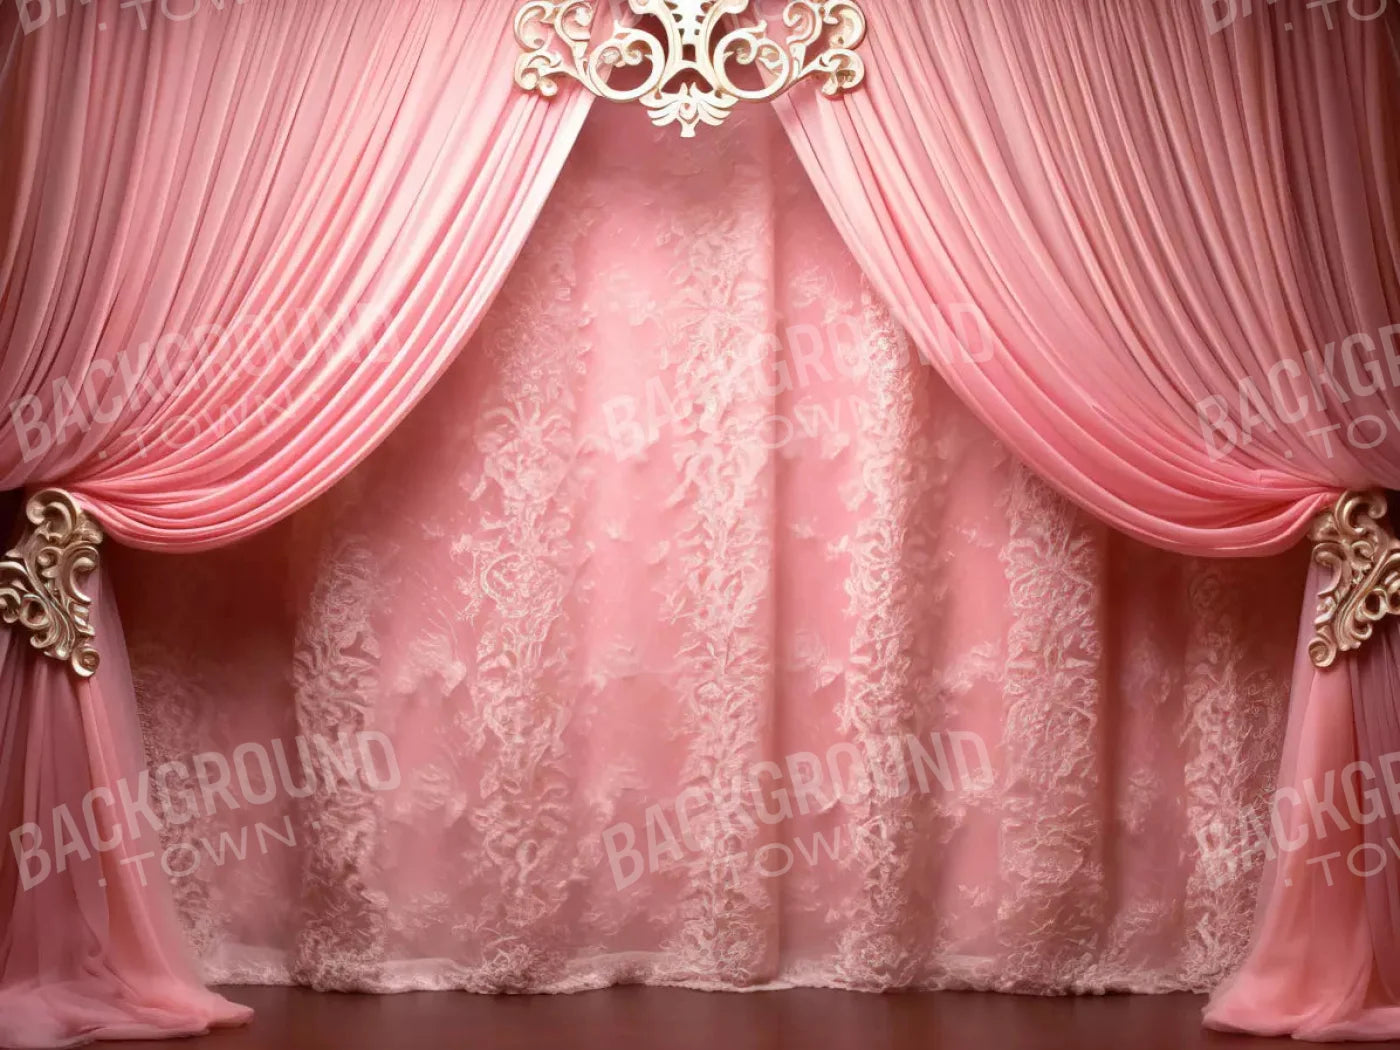 Doll House Curtains 7X5 Ultracloth ( 84 X 60 Inch ) Backdrop